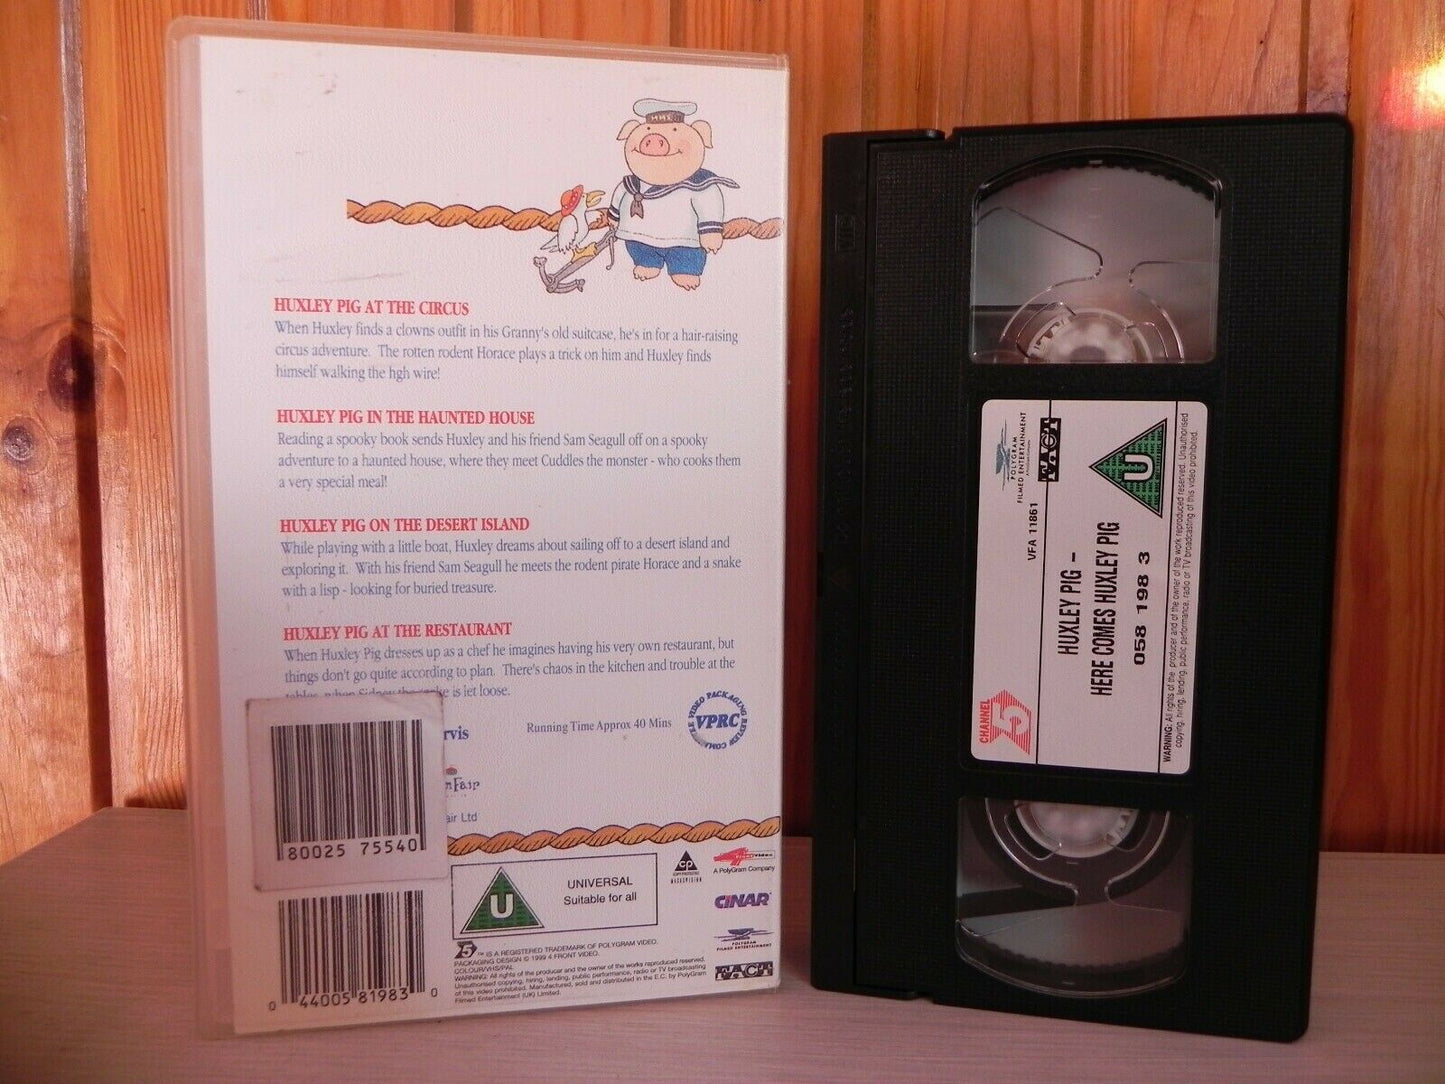 Here Comes Huxley Pig: By Rodney Peppe - Animated Adventures - Kids - Pal VHS-